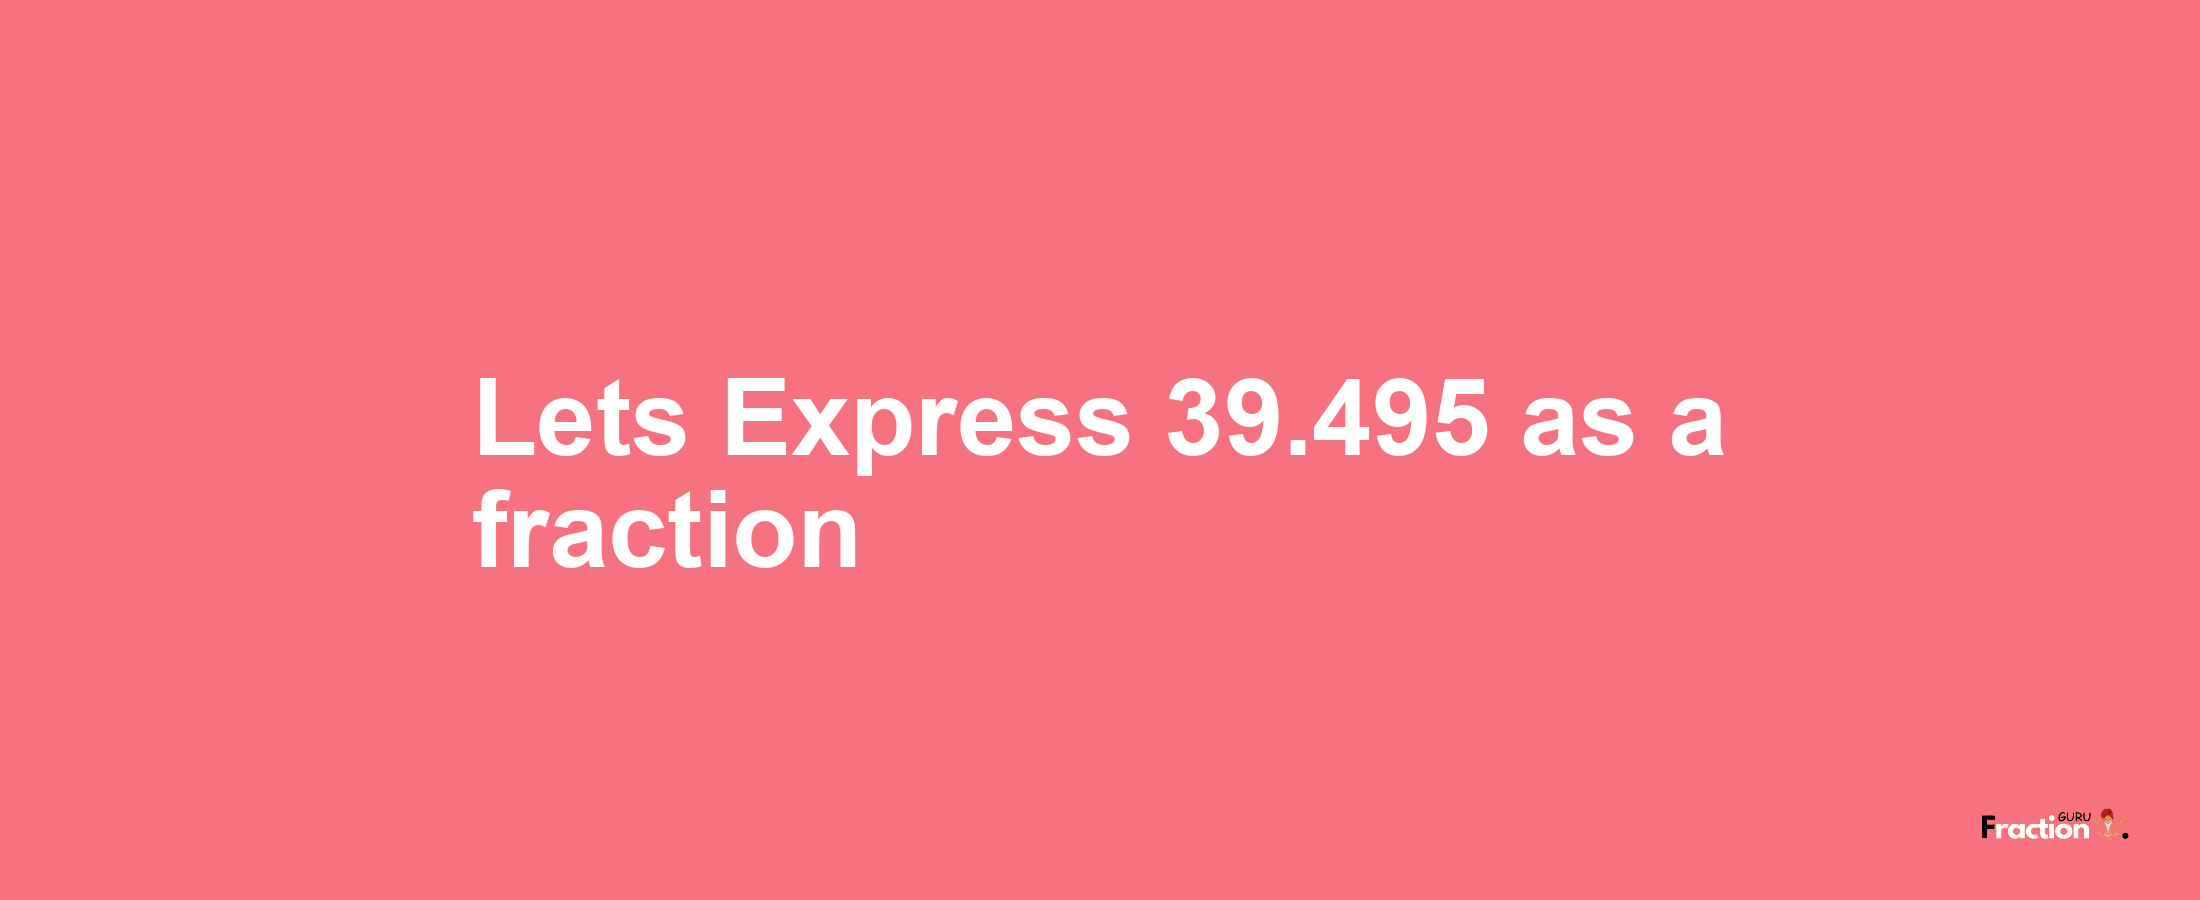 Lets Express 39.495 as afraction